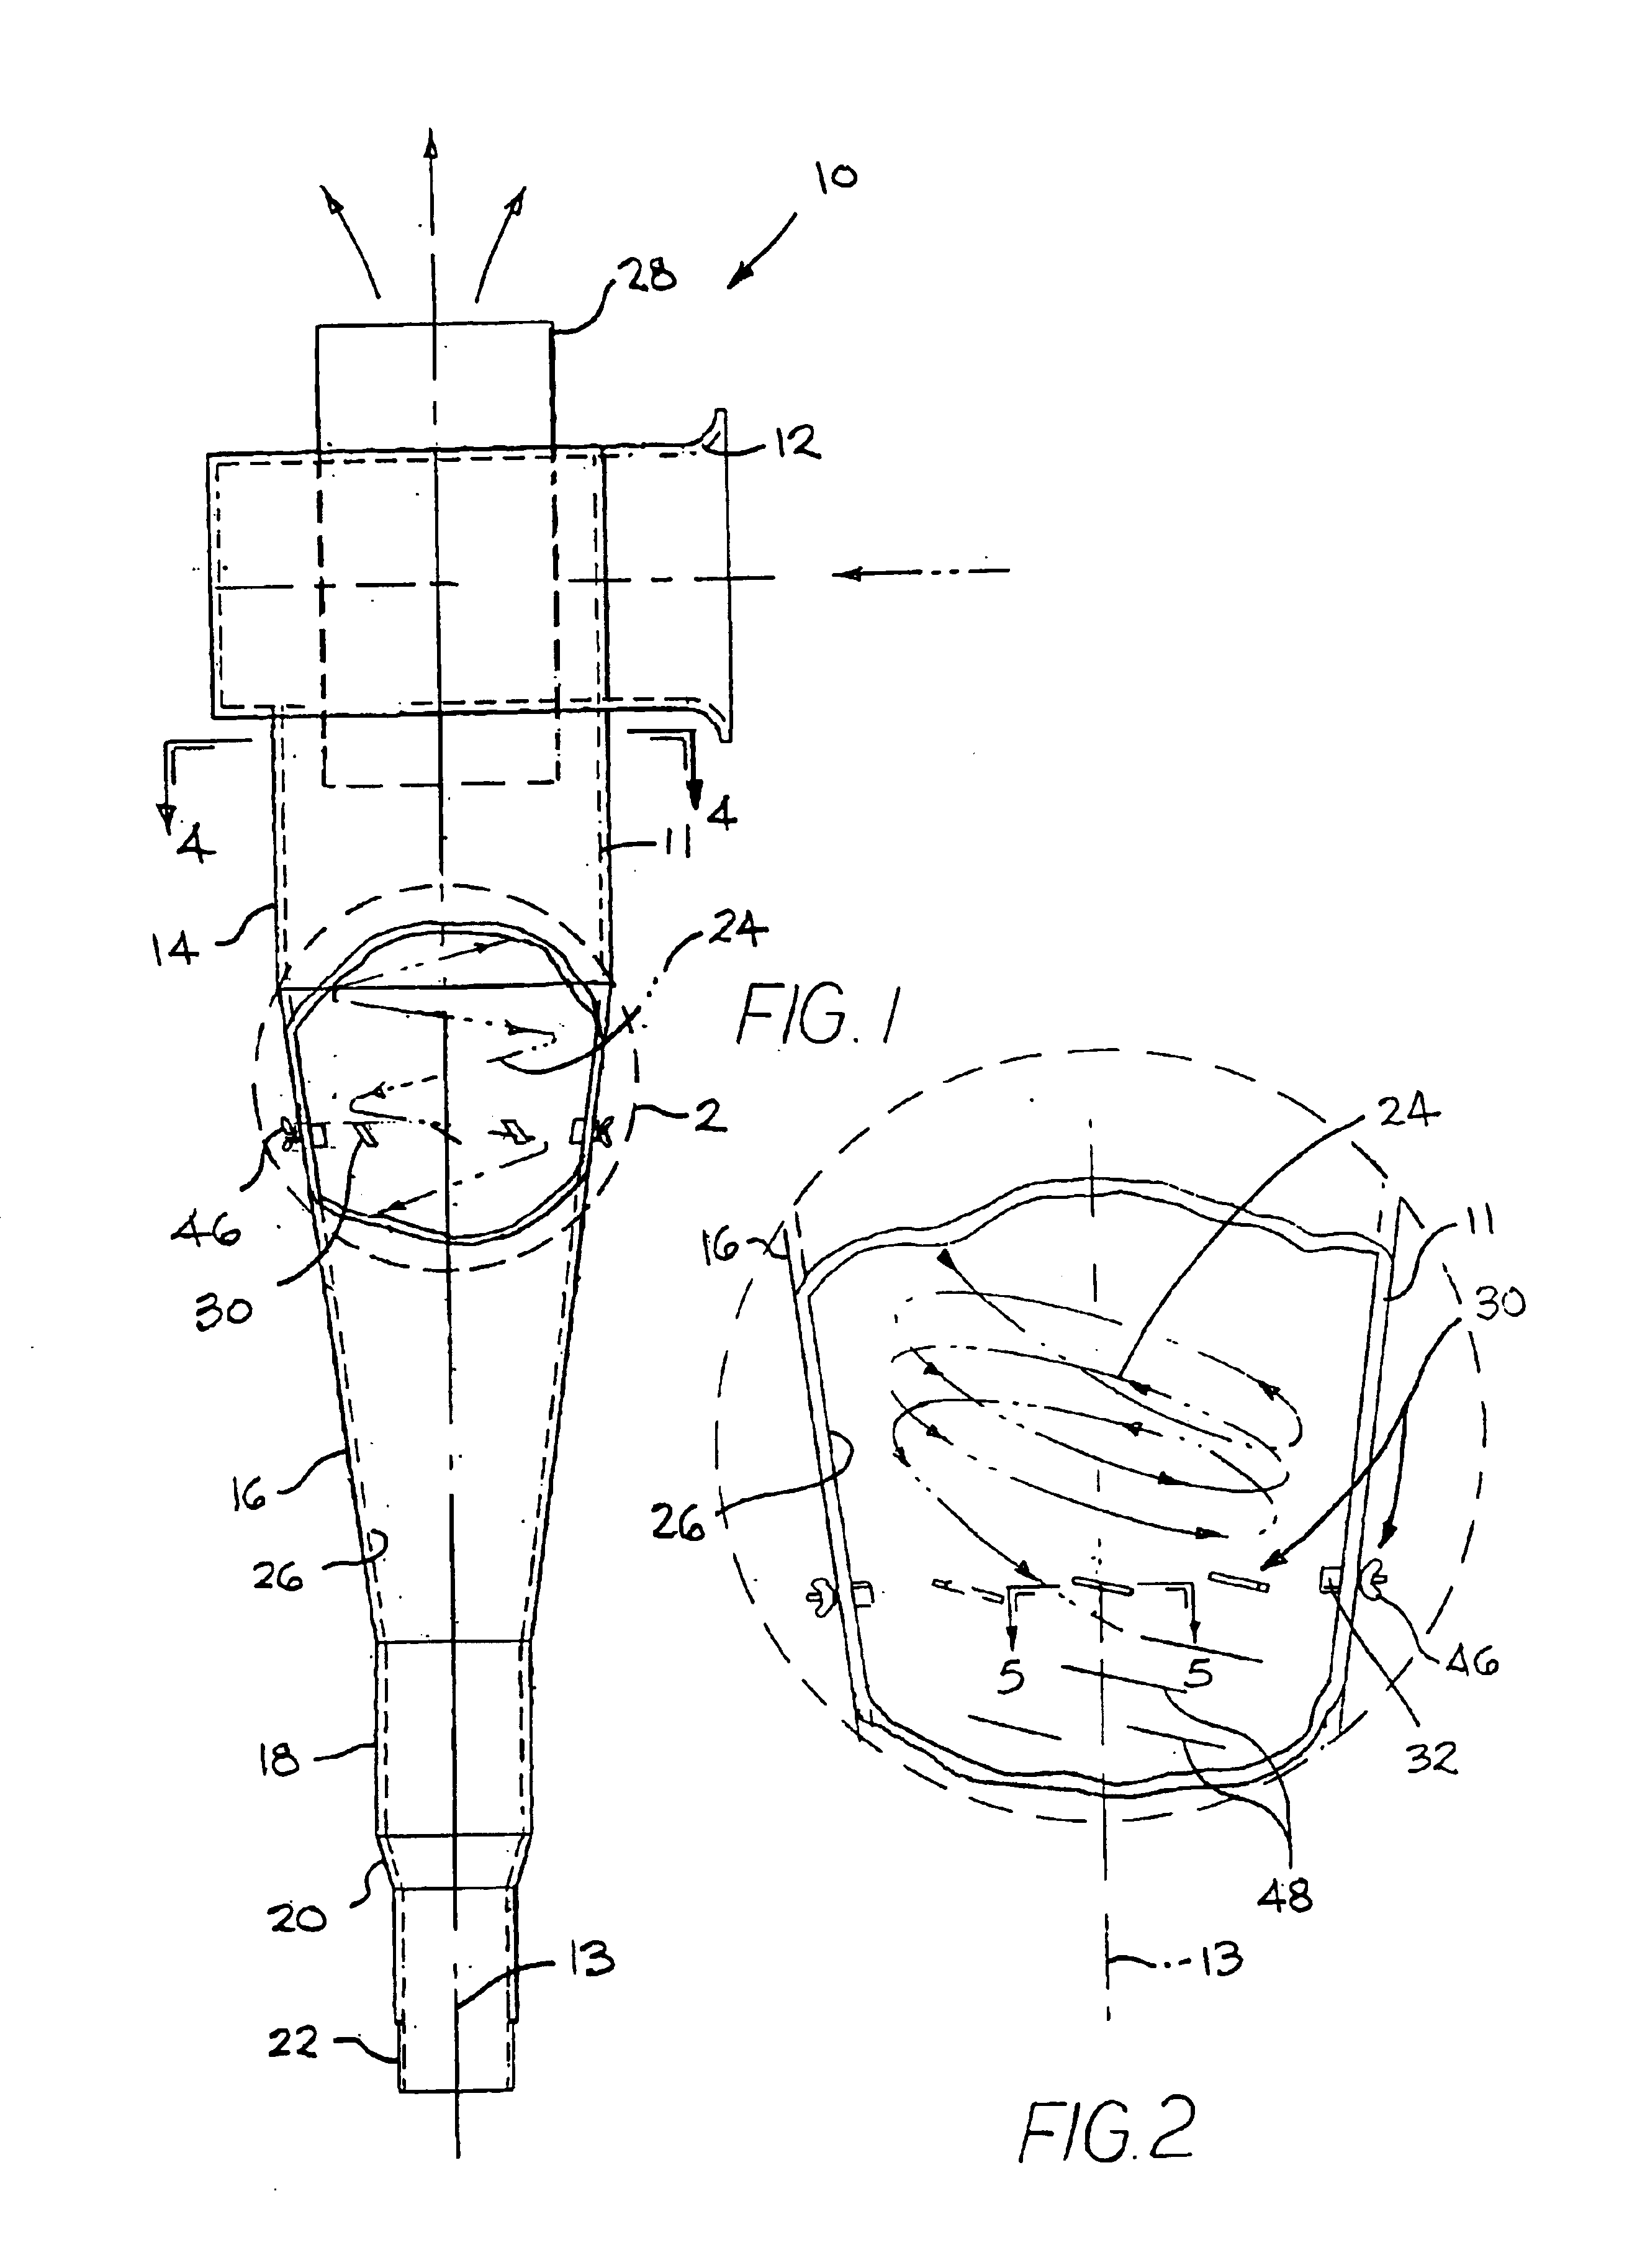 Cyclone separator with surface vanes